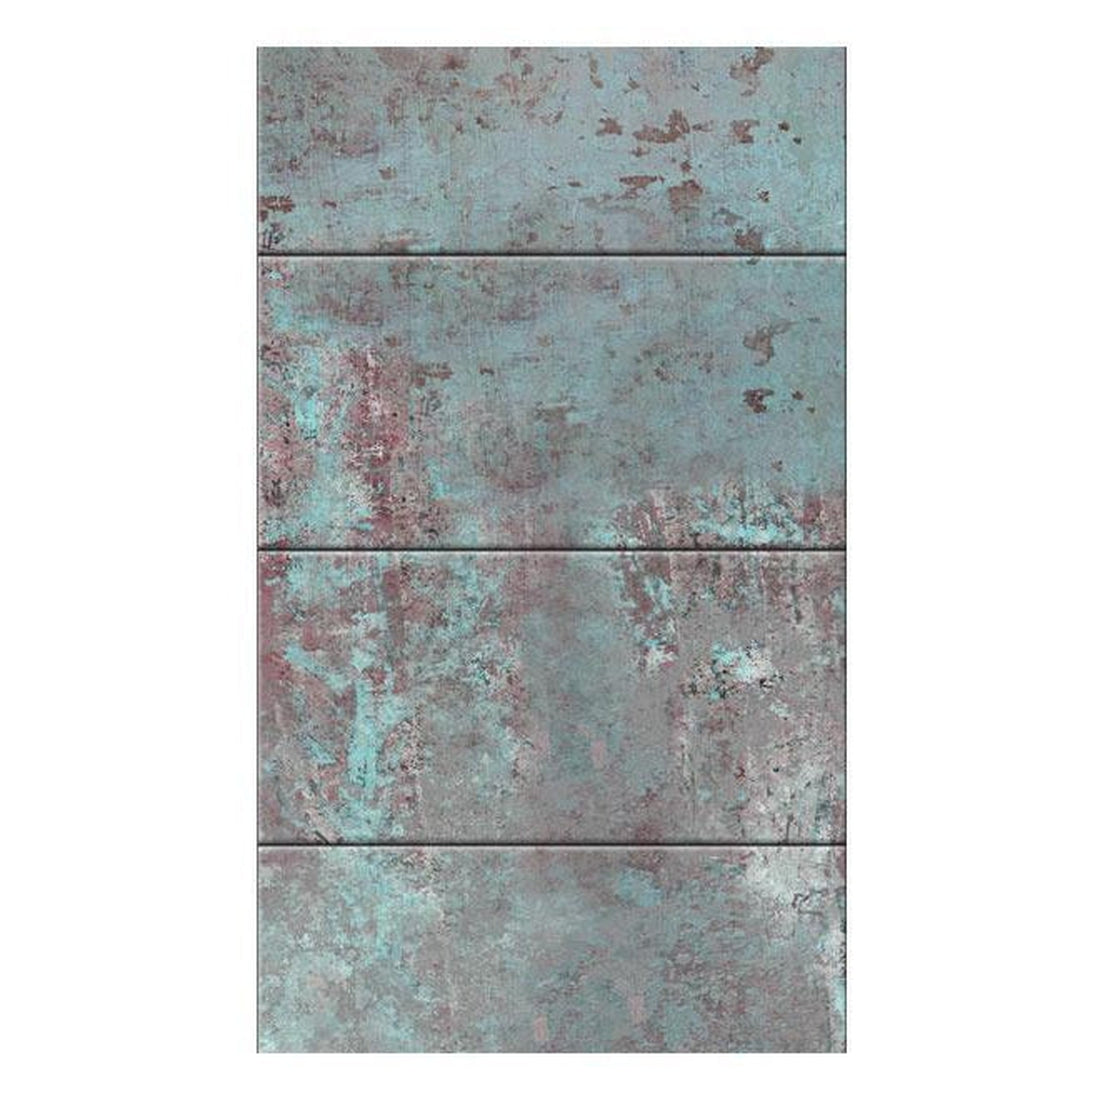 Wall mural - Turquoise Concrete-TipTopHomeDecor